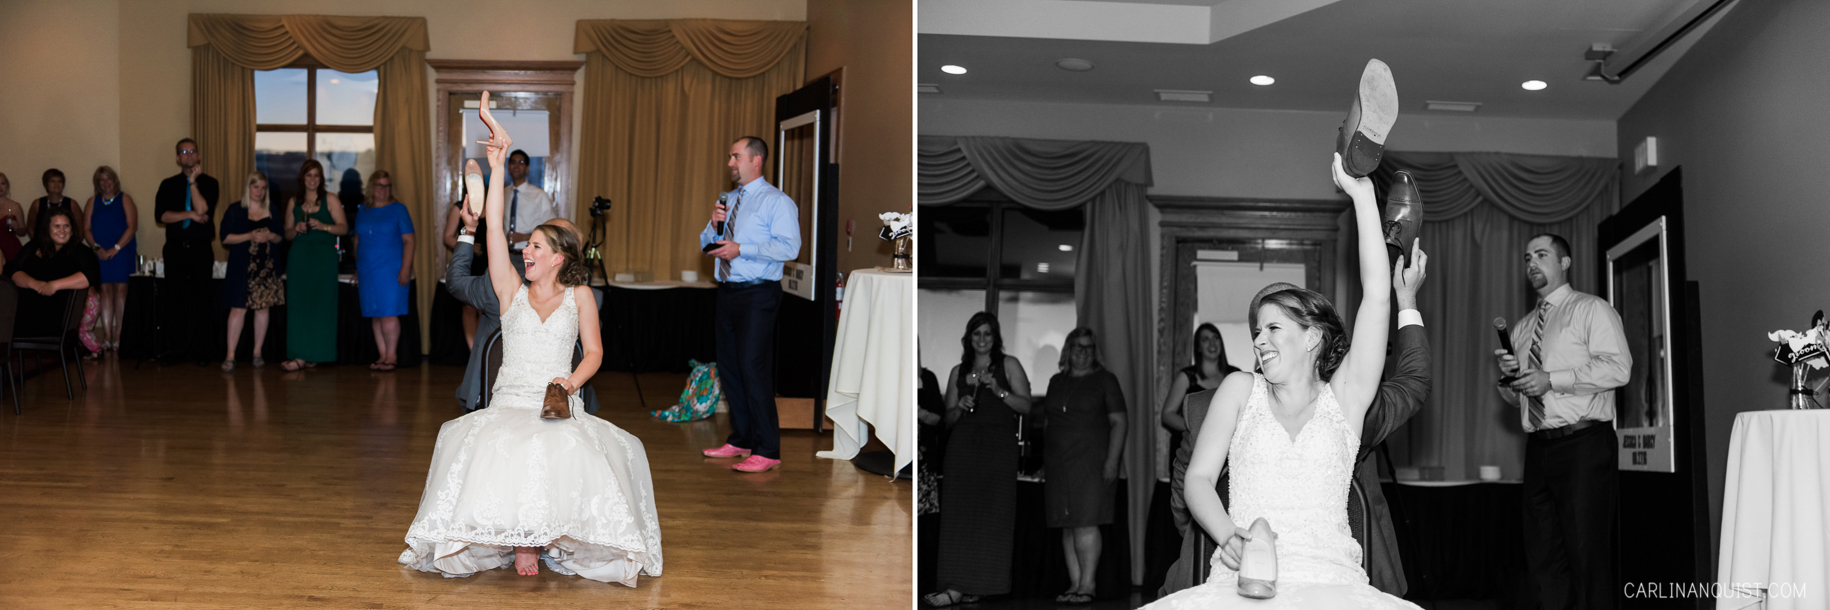 The Shoe Game | The Links Of Glen Eagles Wedding Photographer